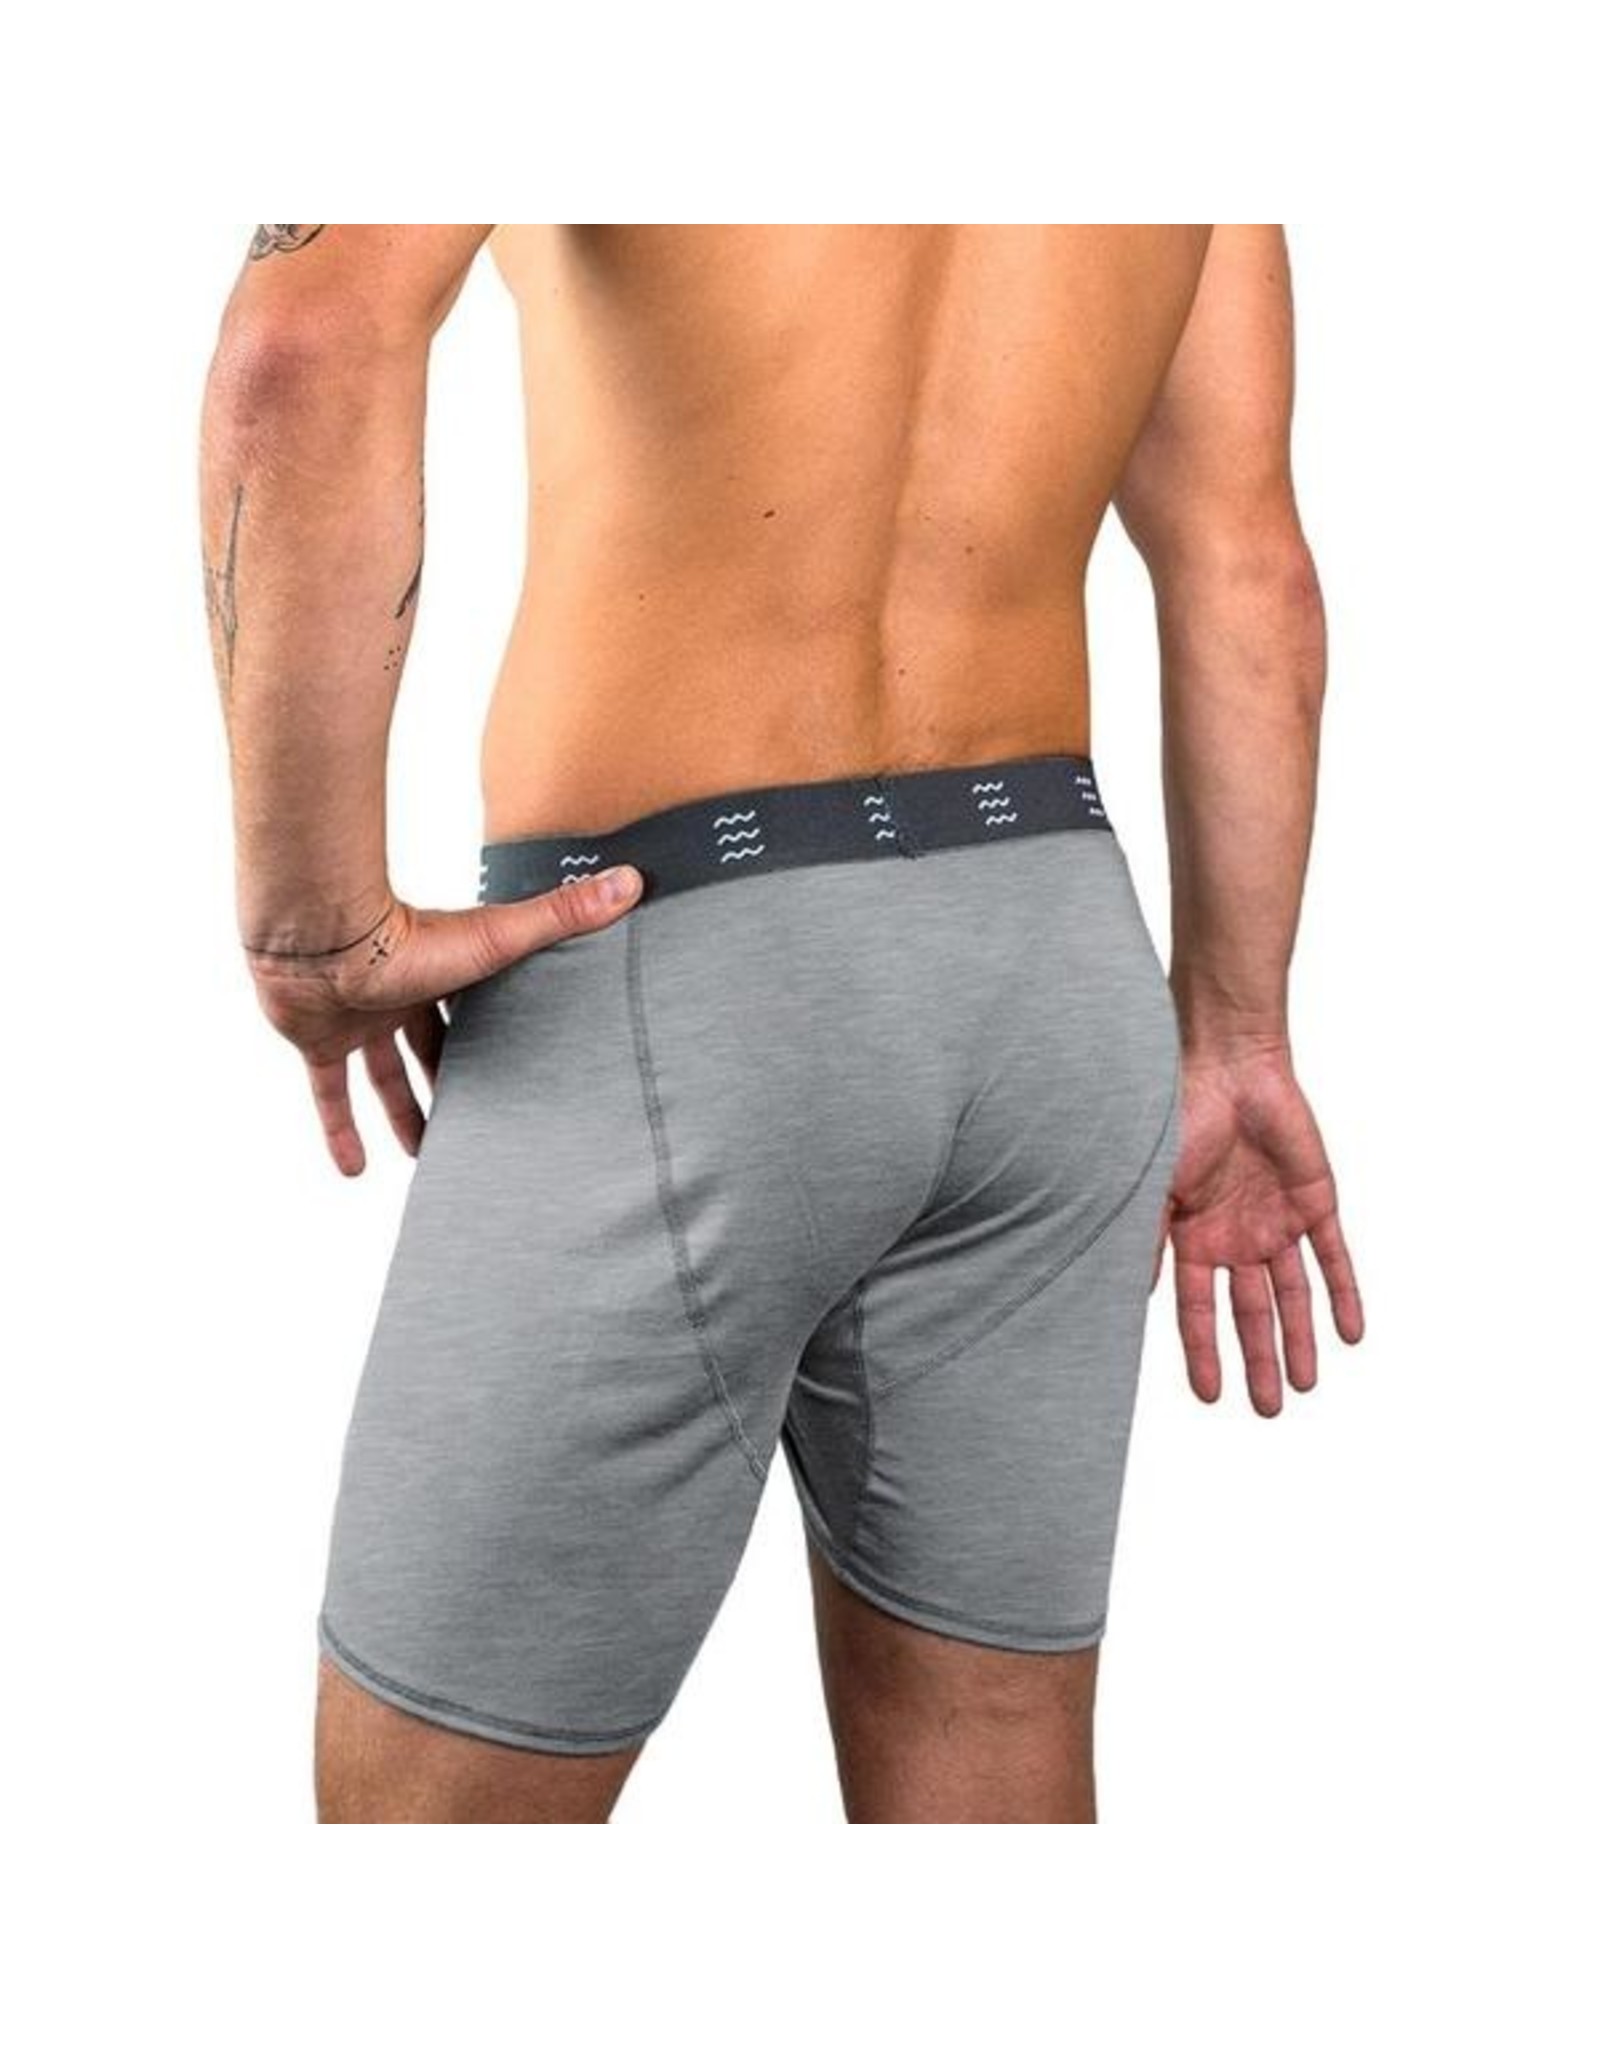 Free Fly Free Fly M's Bamboo Comfort Boxer Brief